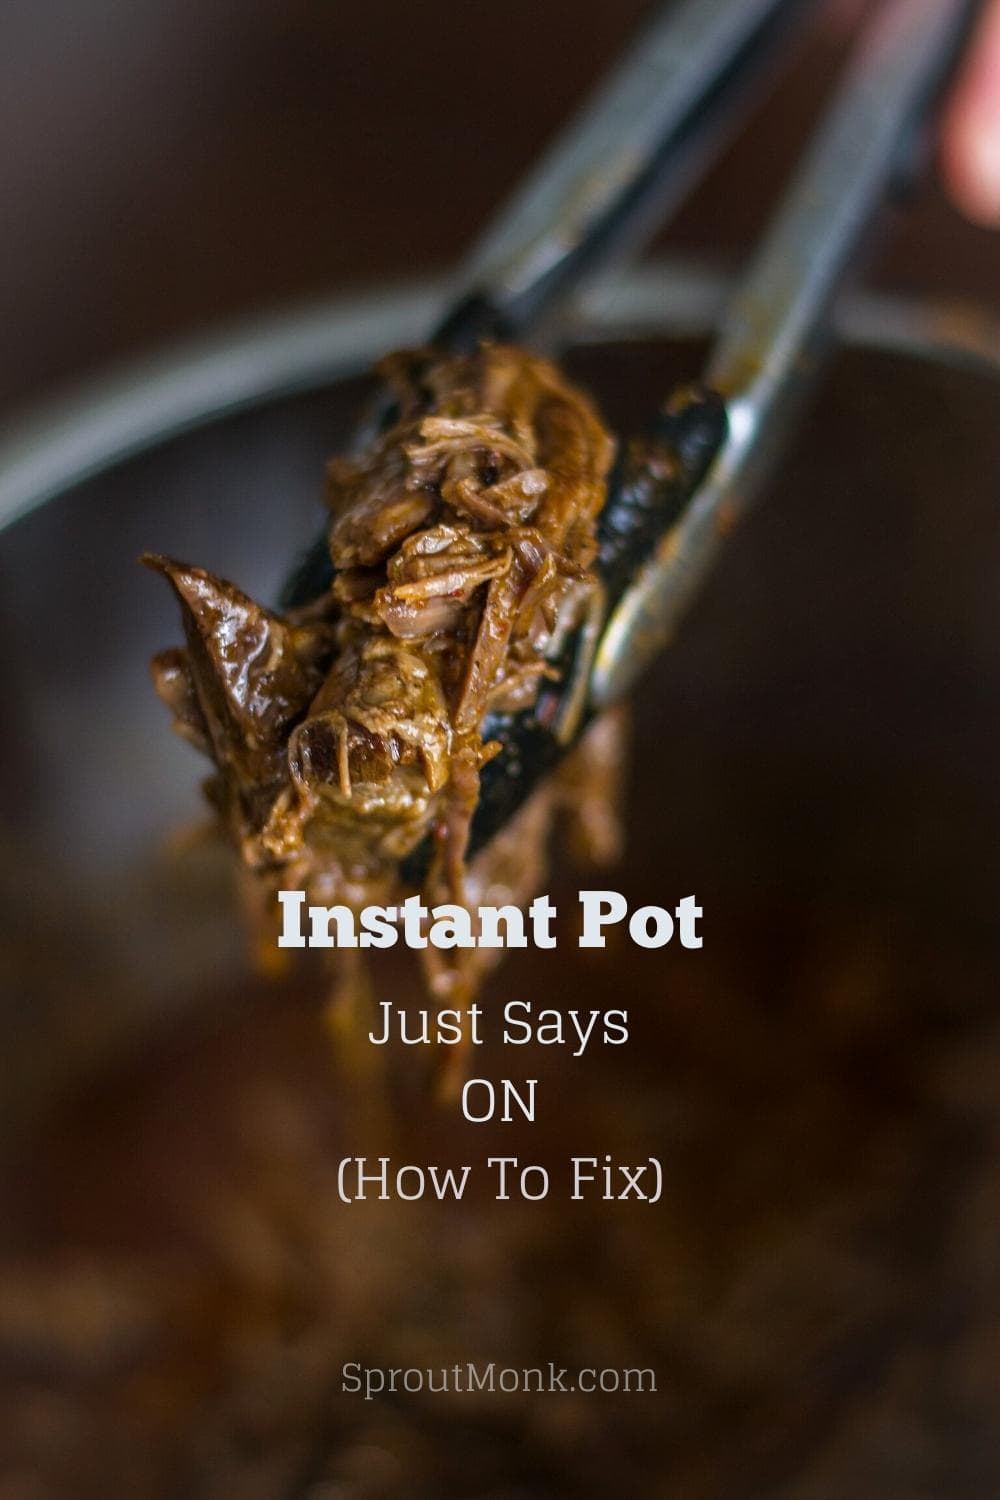 instant pot just says on cover image